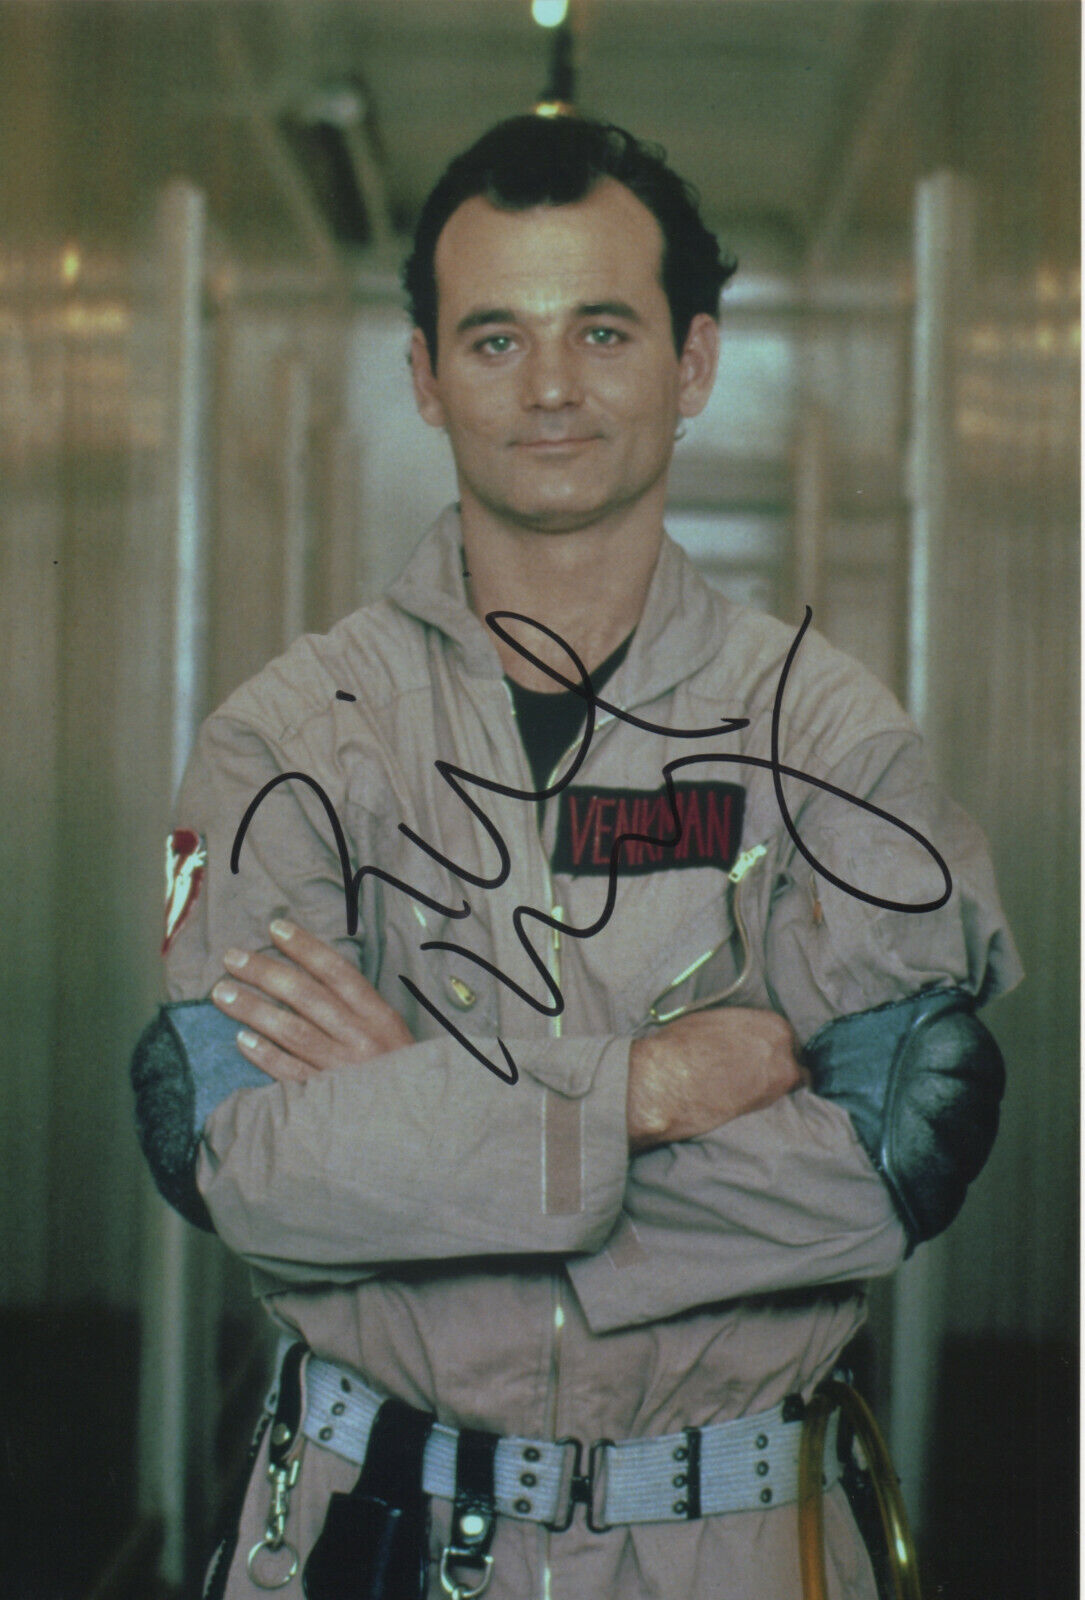 BILL MURRAY Signed 12x8 Photo GHOSTBUSTERS COA